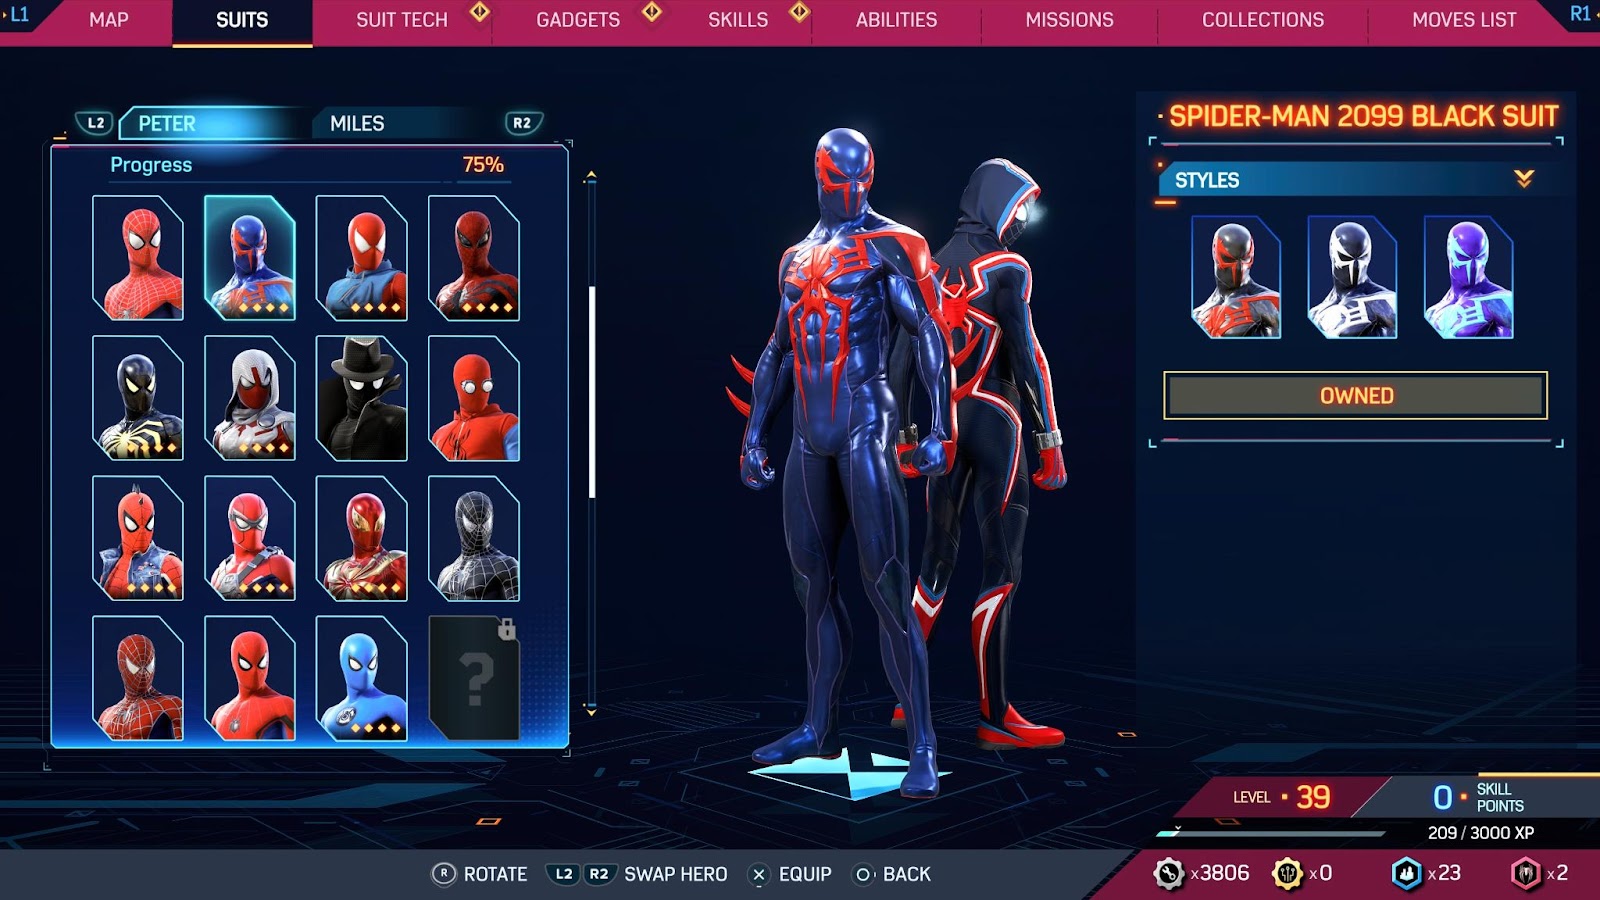 An in game image of Peter Parker in the Spider-Man 2099 Black Suit in the suit menu from Marvel's Spider-Man 2.